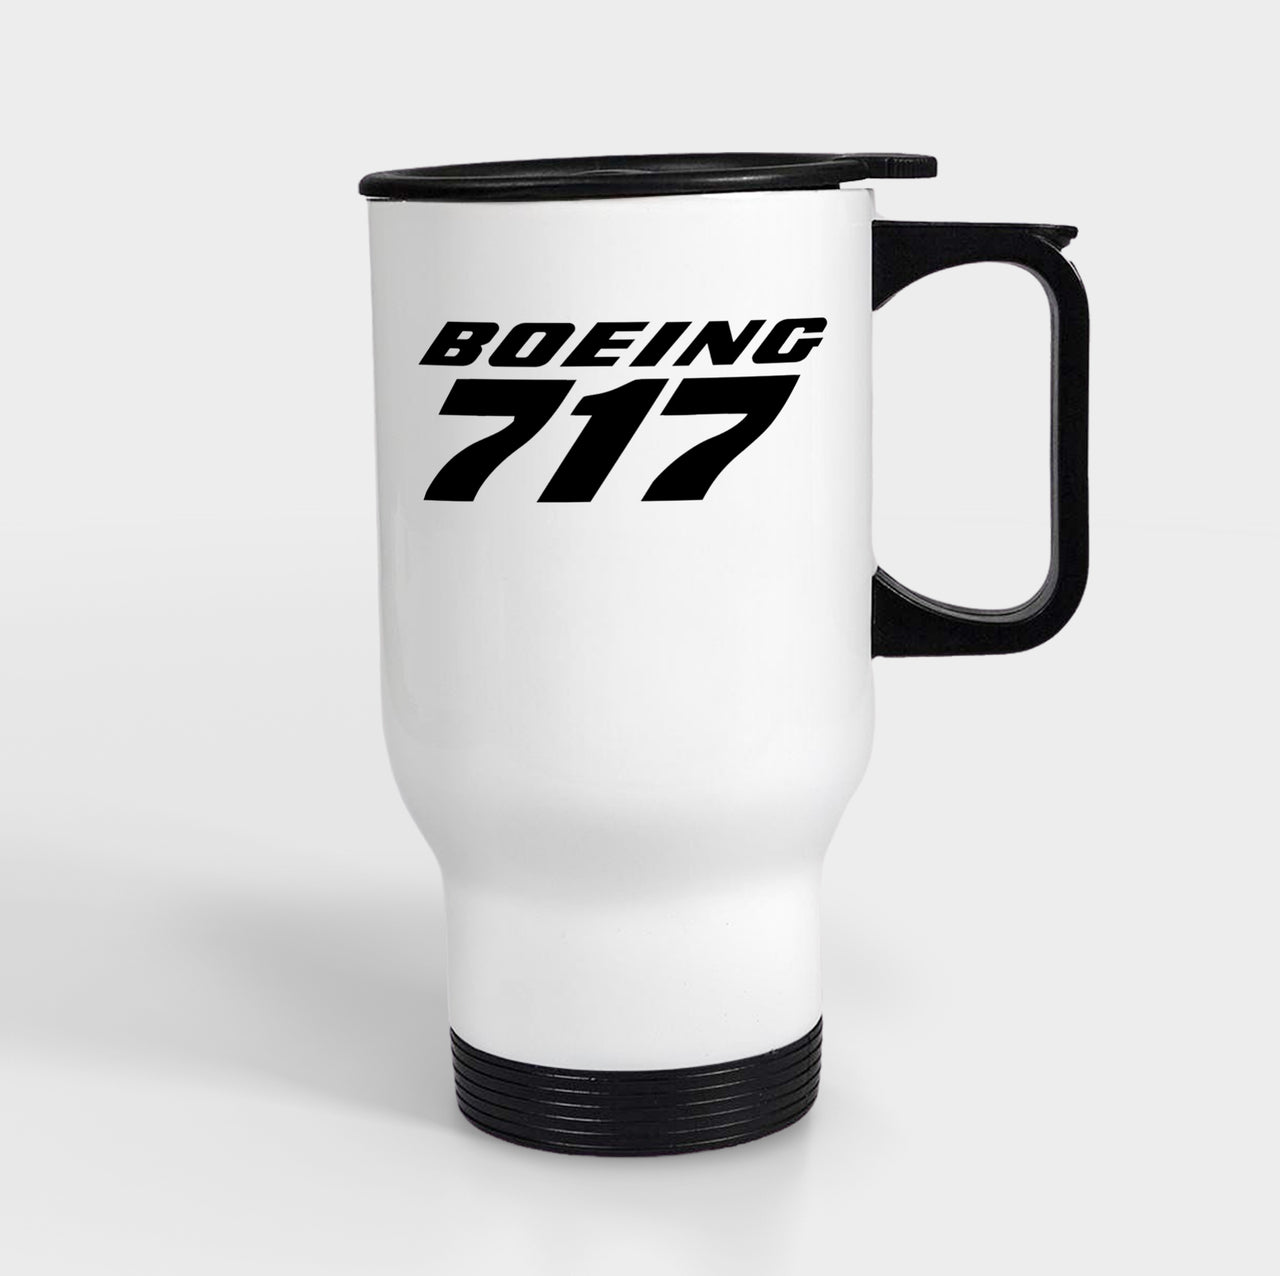 Boeing 717 & Text Designed Travel Mugs (With Holder)